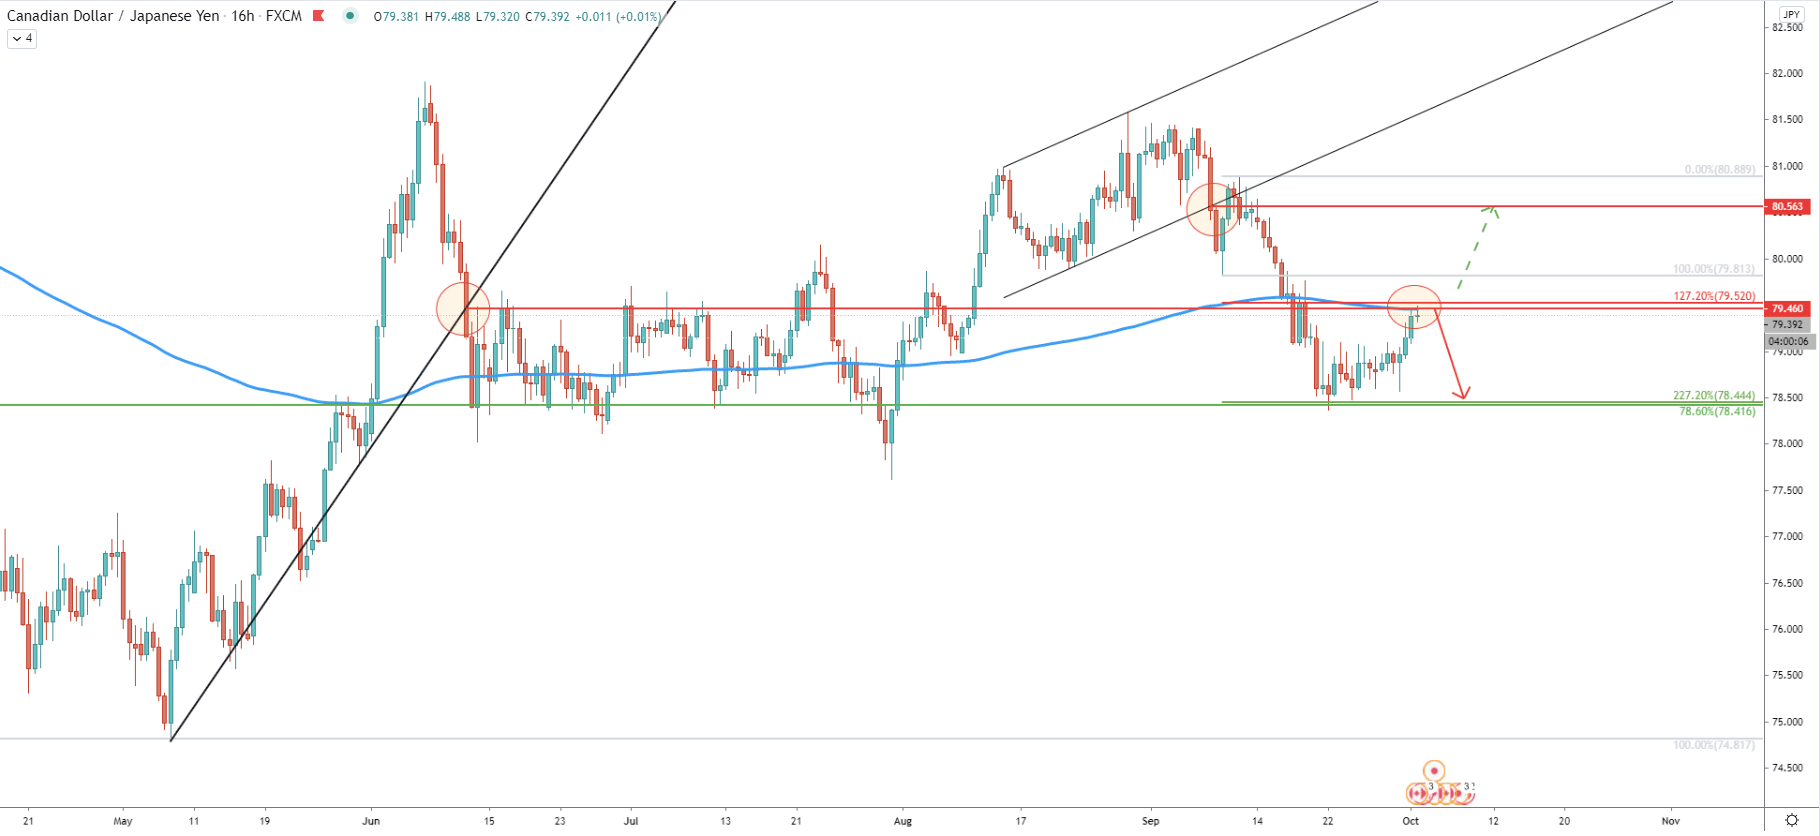 CAD/JPY 16-Hour Technical Analysis 1 Oct 2020